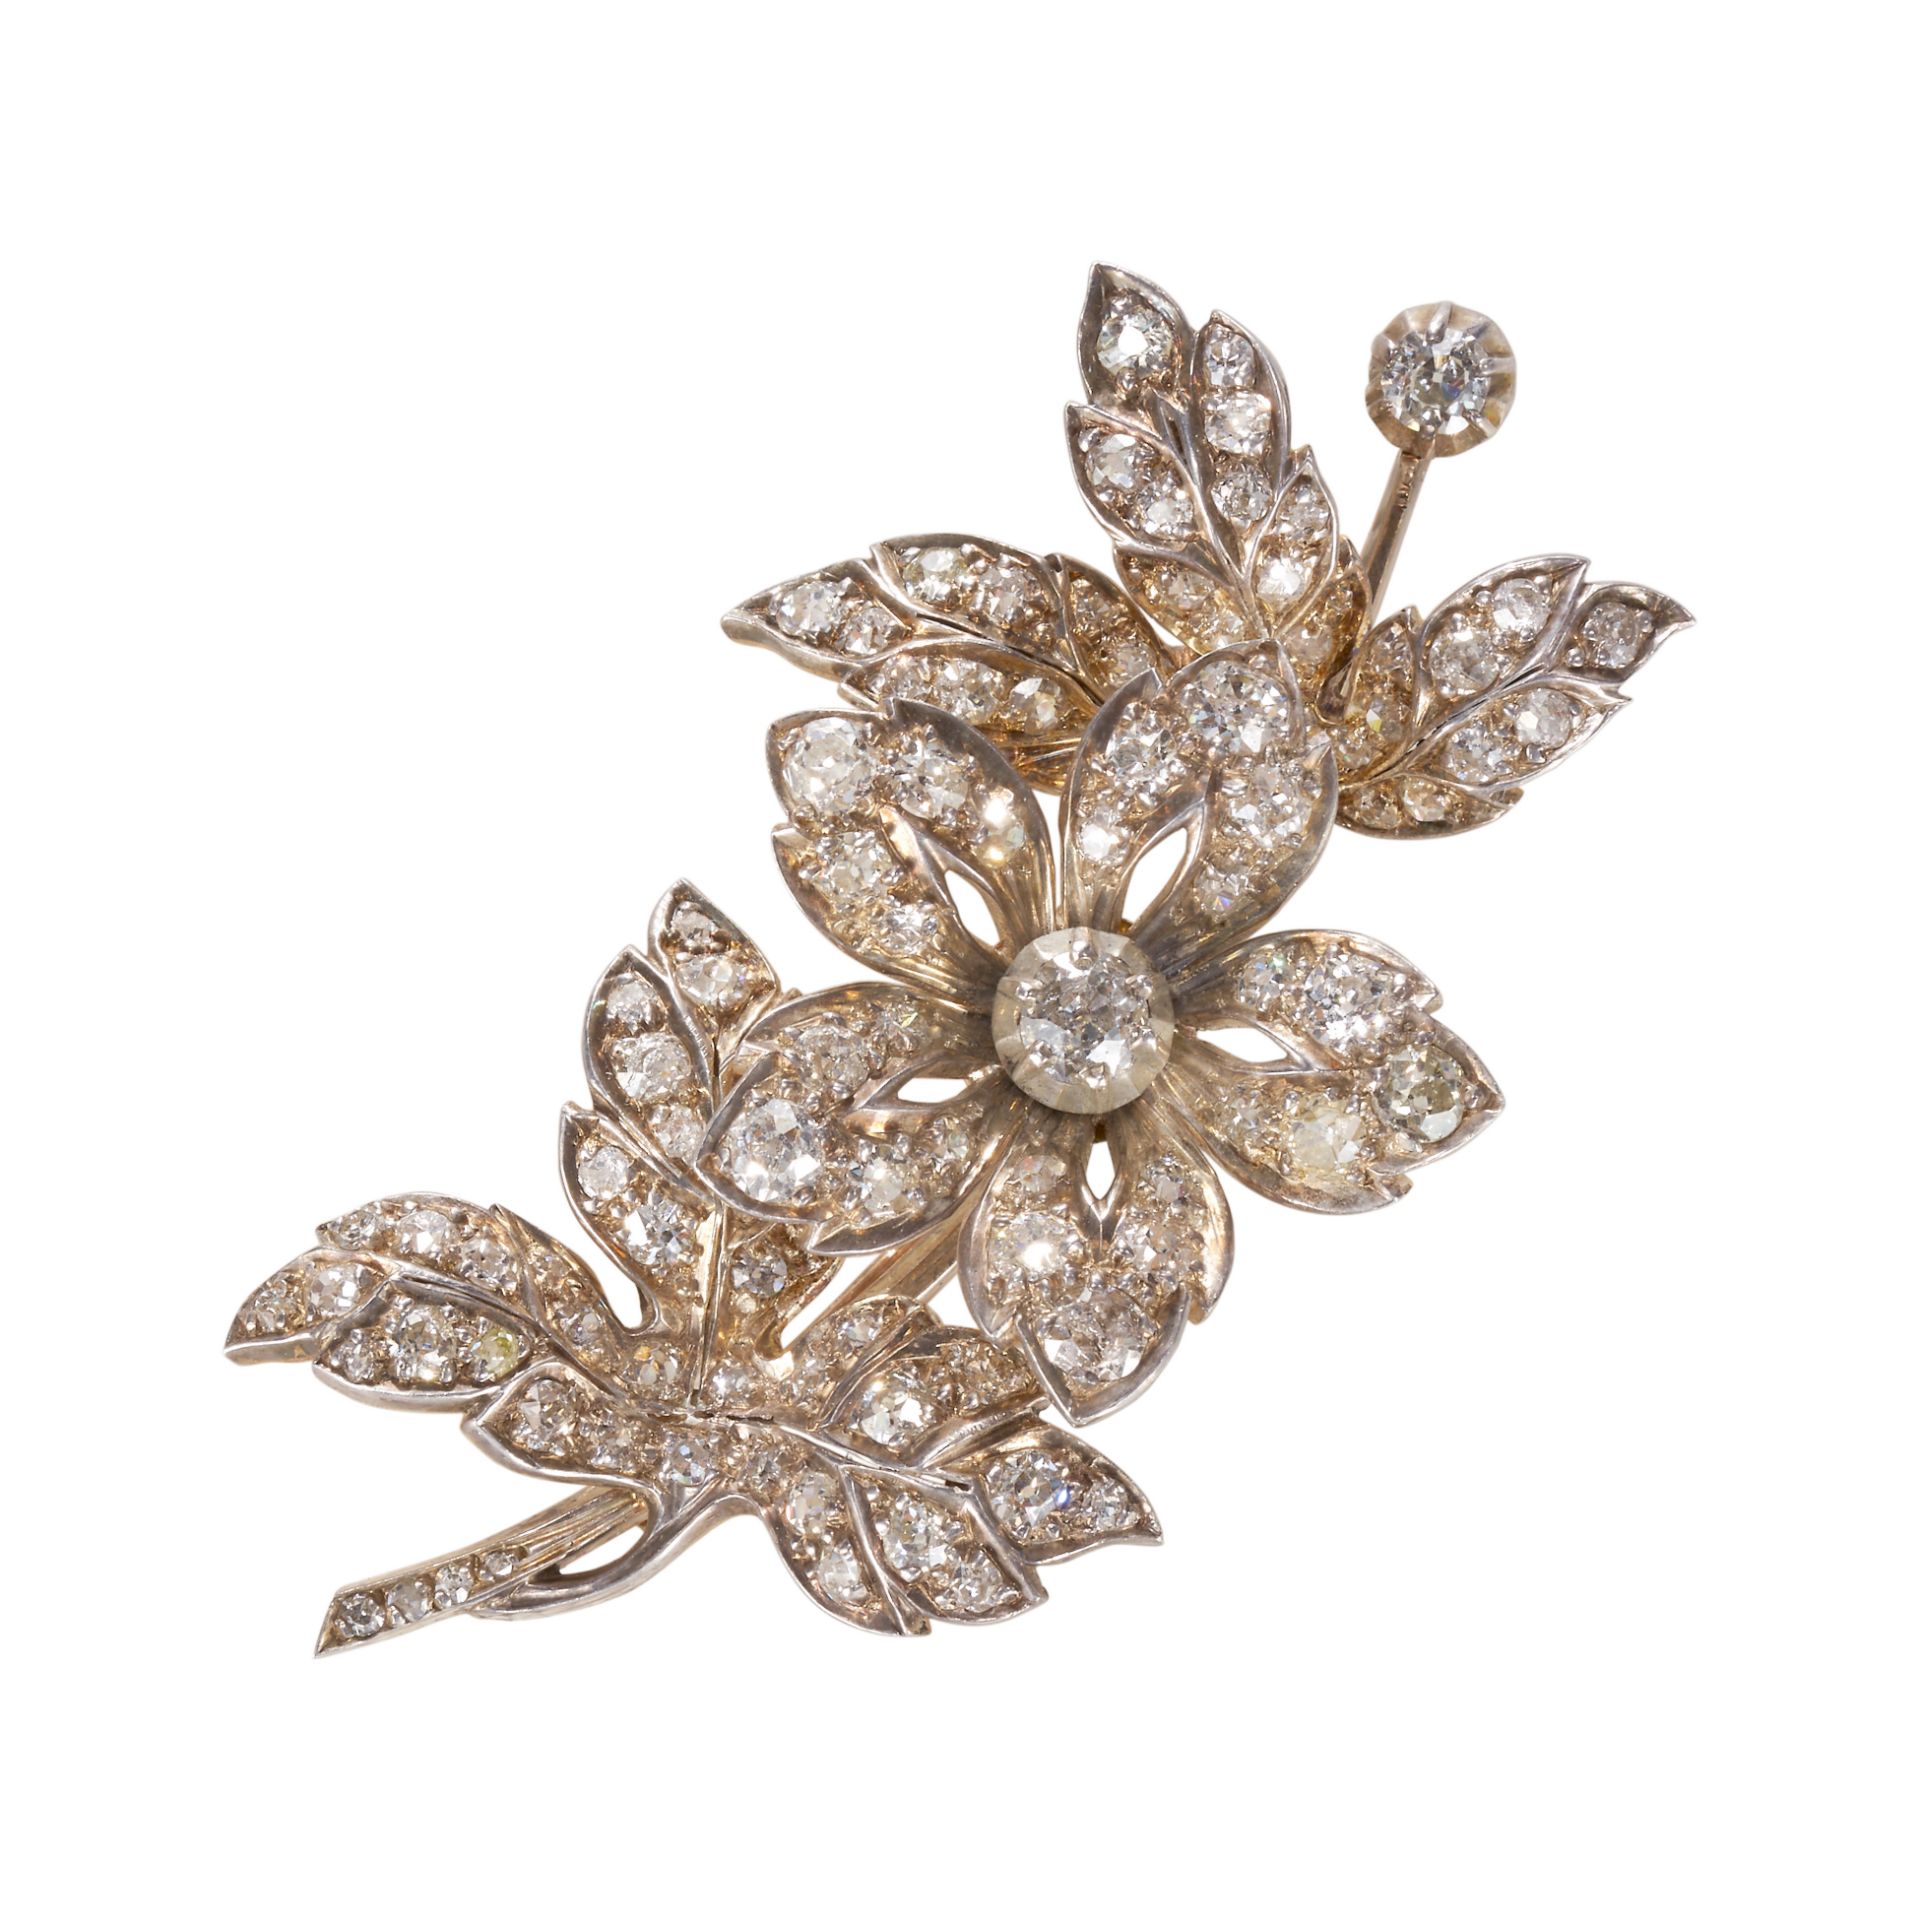 AN ANTIQUE OLD CUT DIAMOND EN TREMBLANT FLORAL SPRAY BROOC, IN YELLOW GOLD AND SILVER.